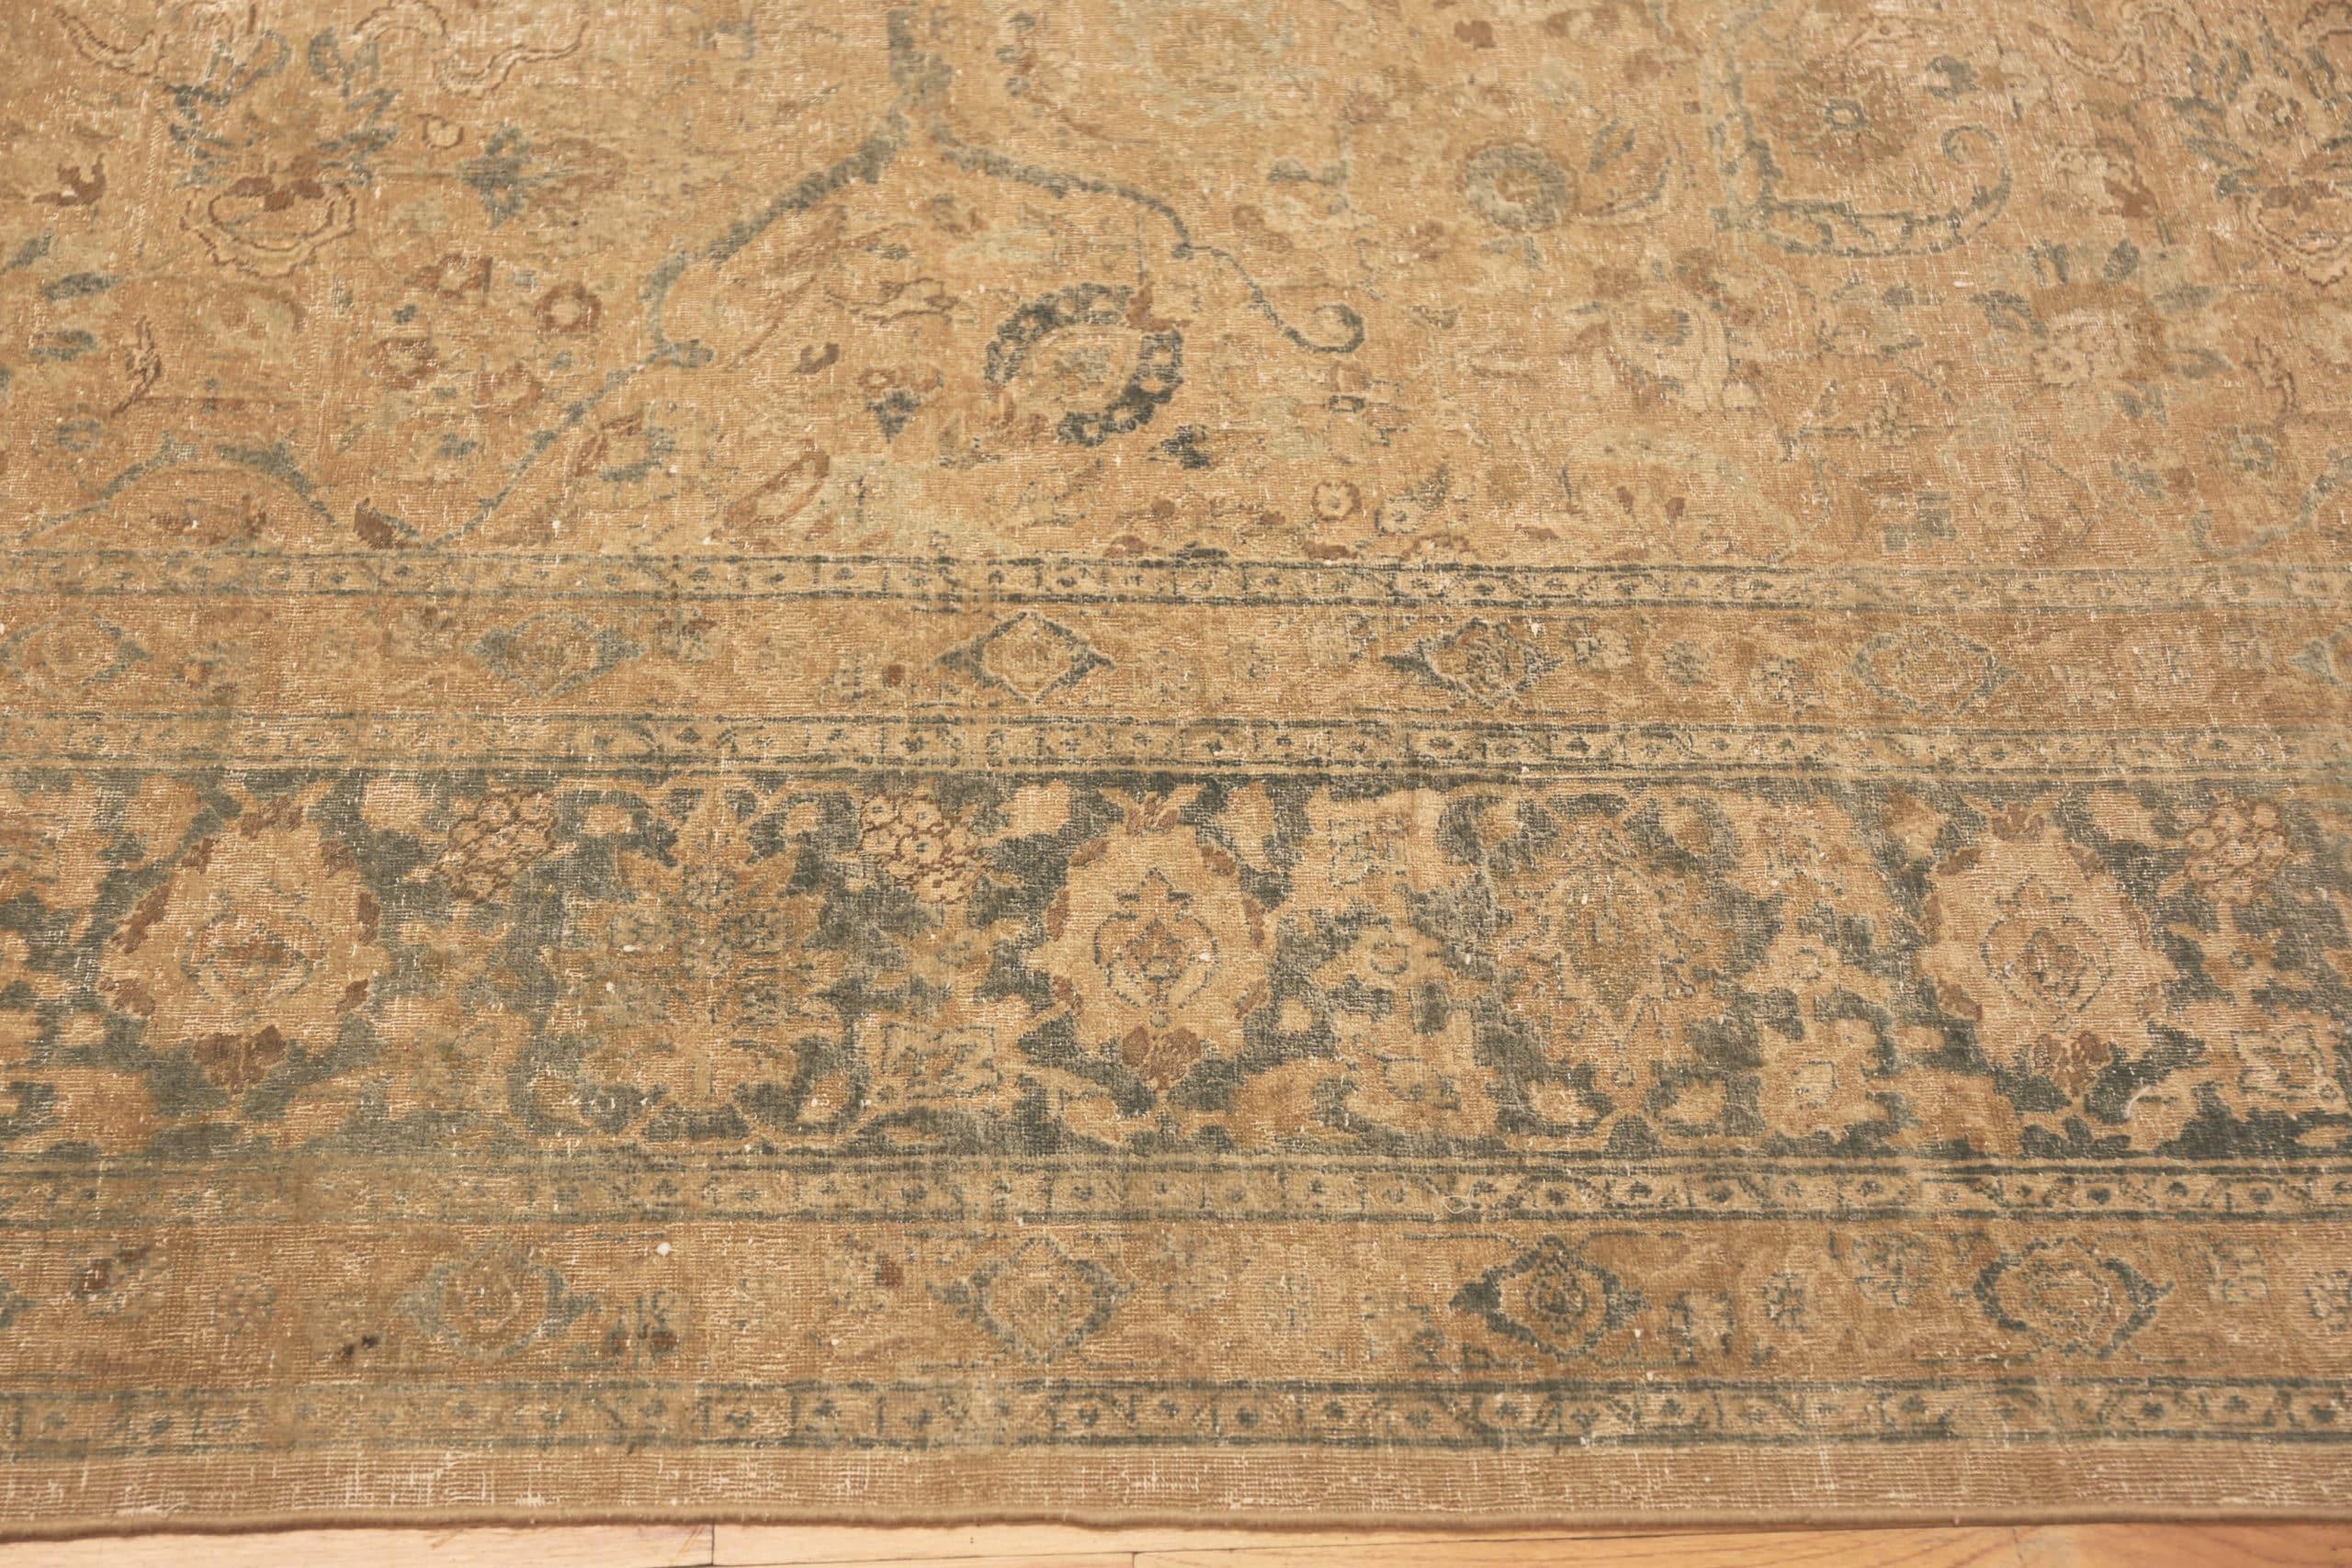 Antique Persian Floral Tabriz Rug, Country of Origin: Persia, Circa date: 1920. Size: 12 ft 10 in x 21 ft 3 in (3.91 m x 6.48 m)

